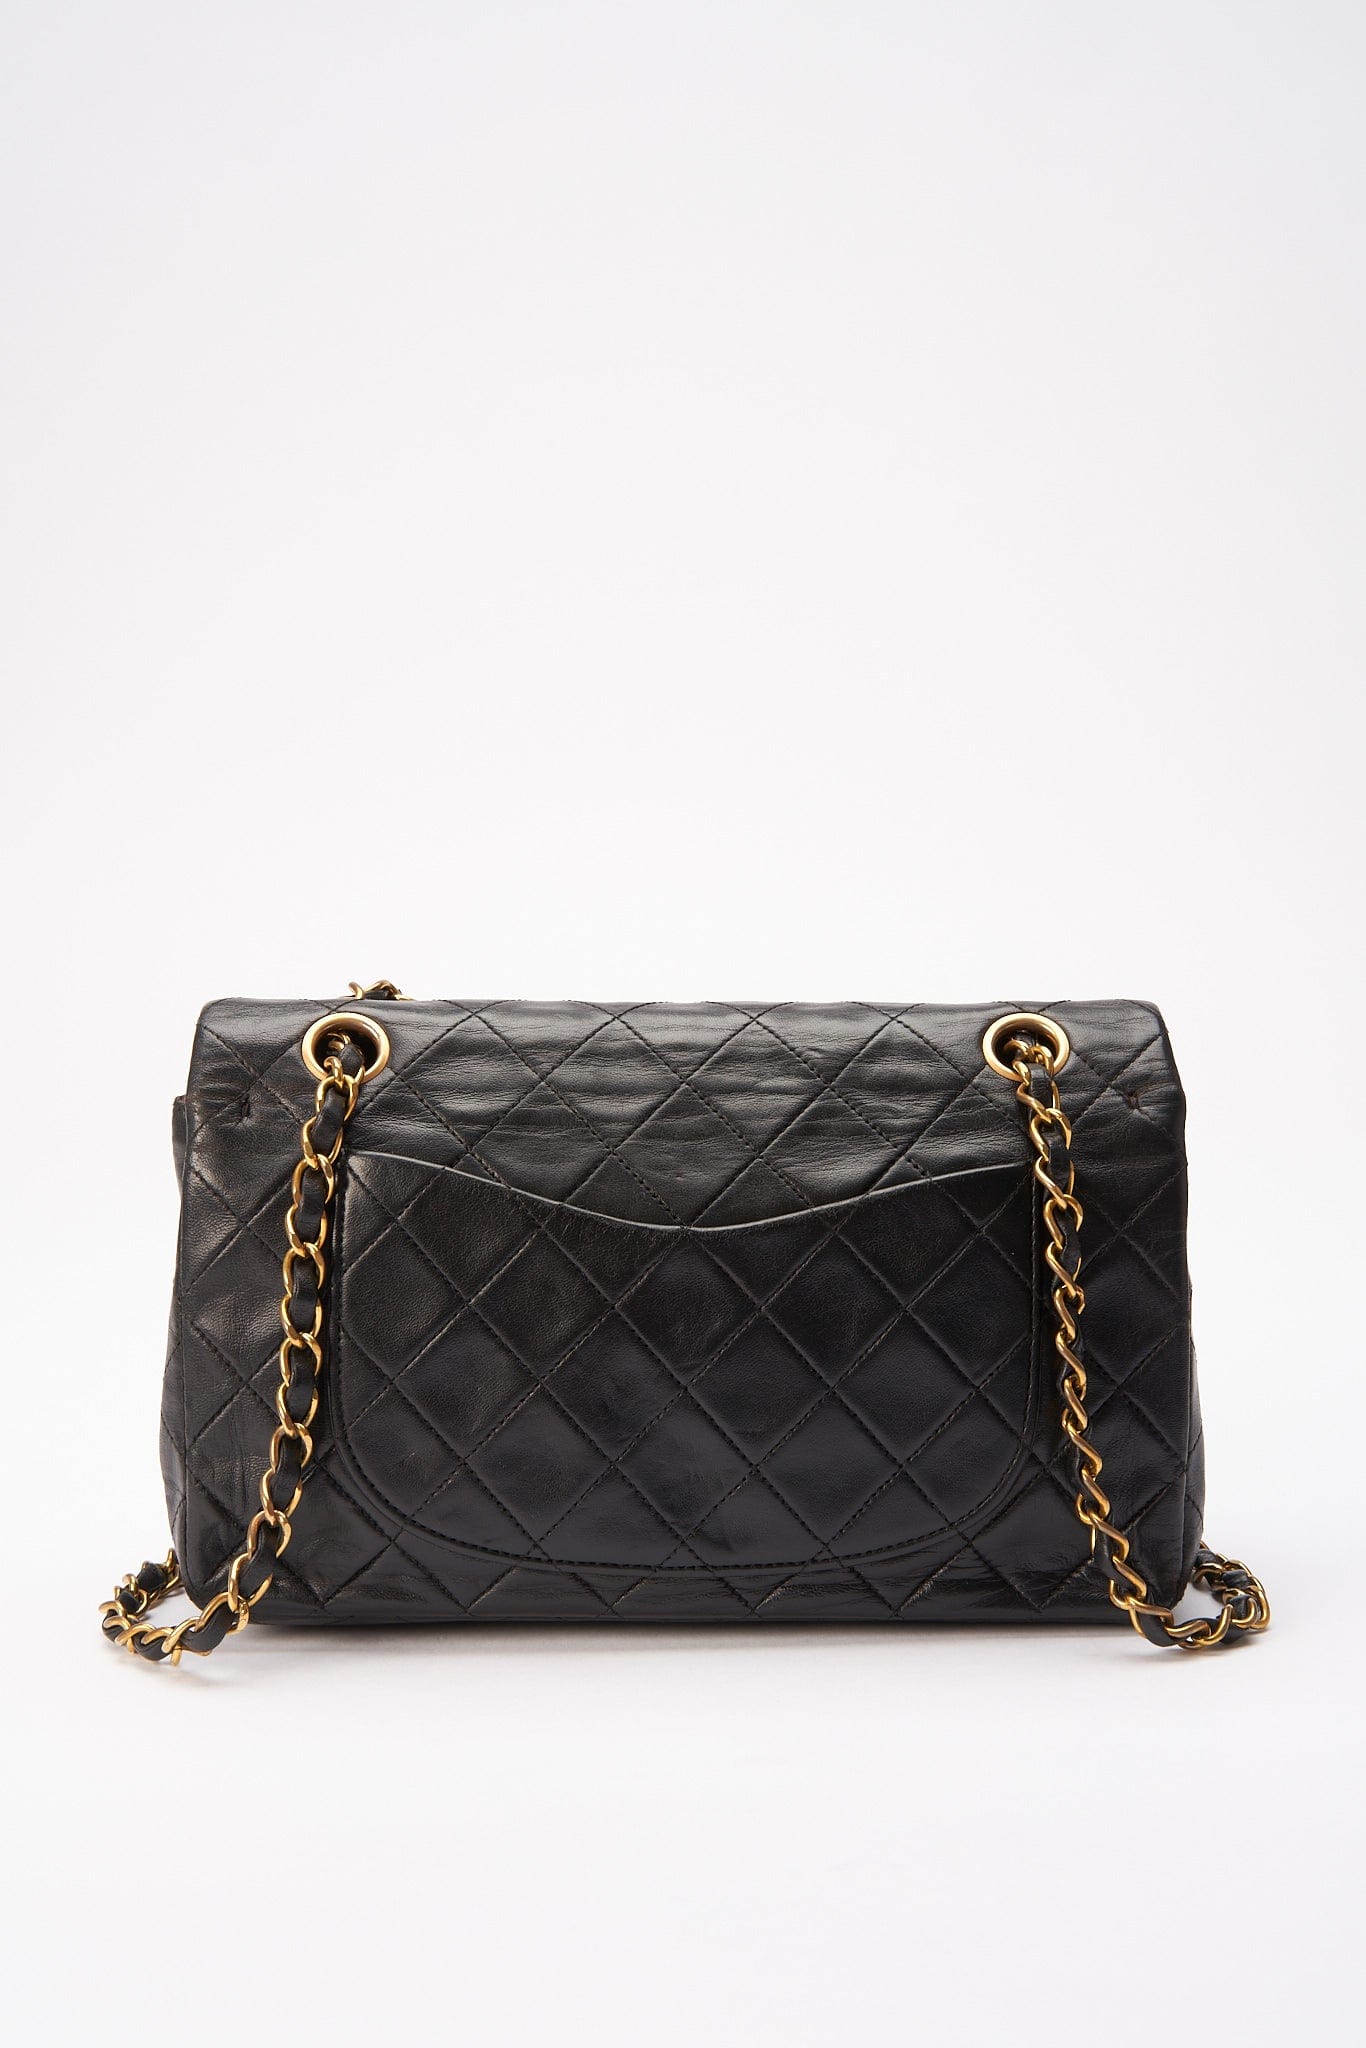 Chanel Classic Double Flap Bag Small Black Lambskin Leather – The